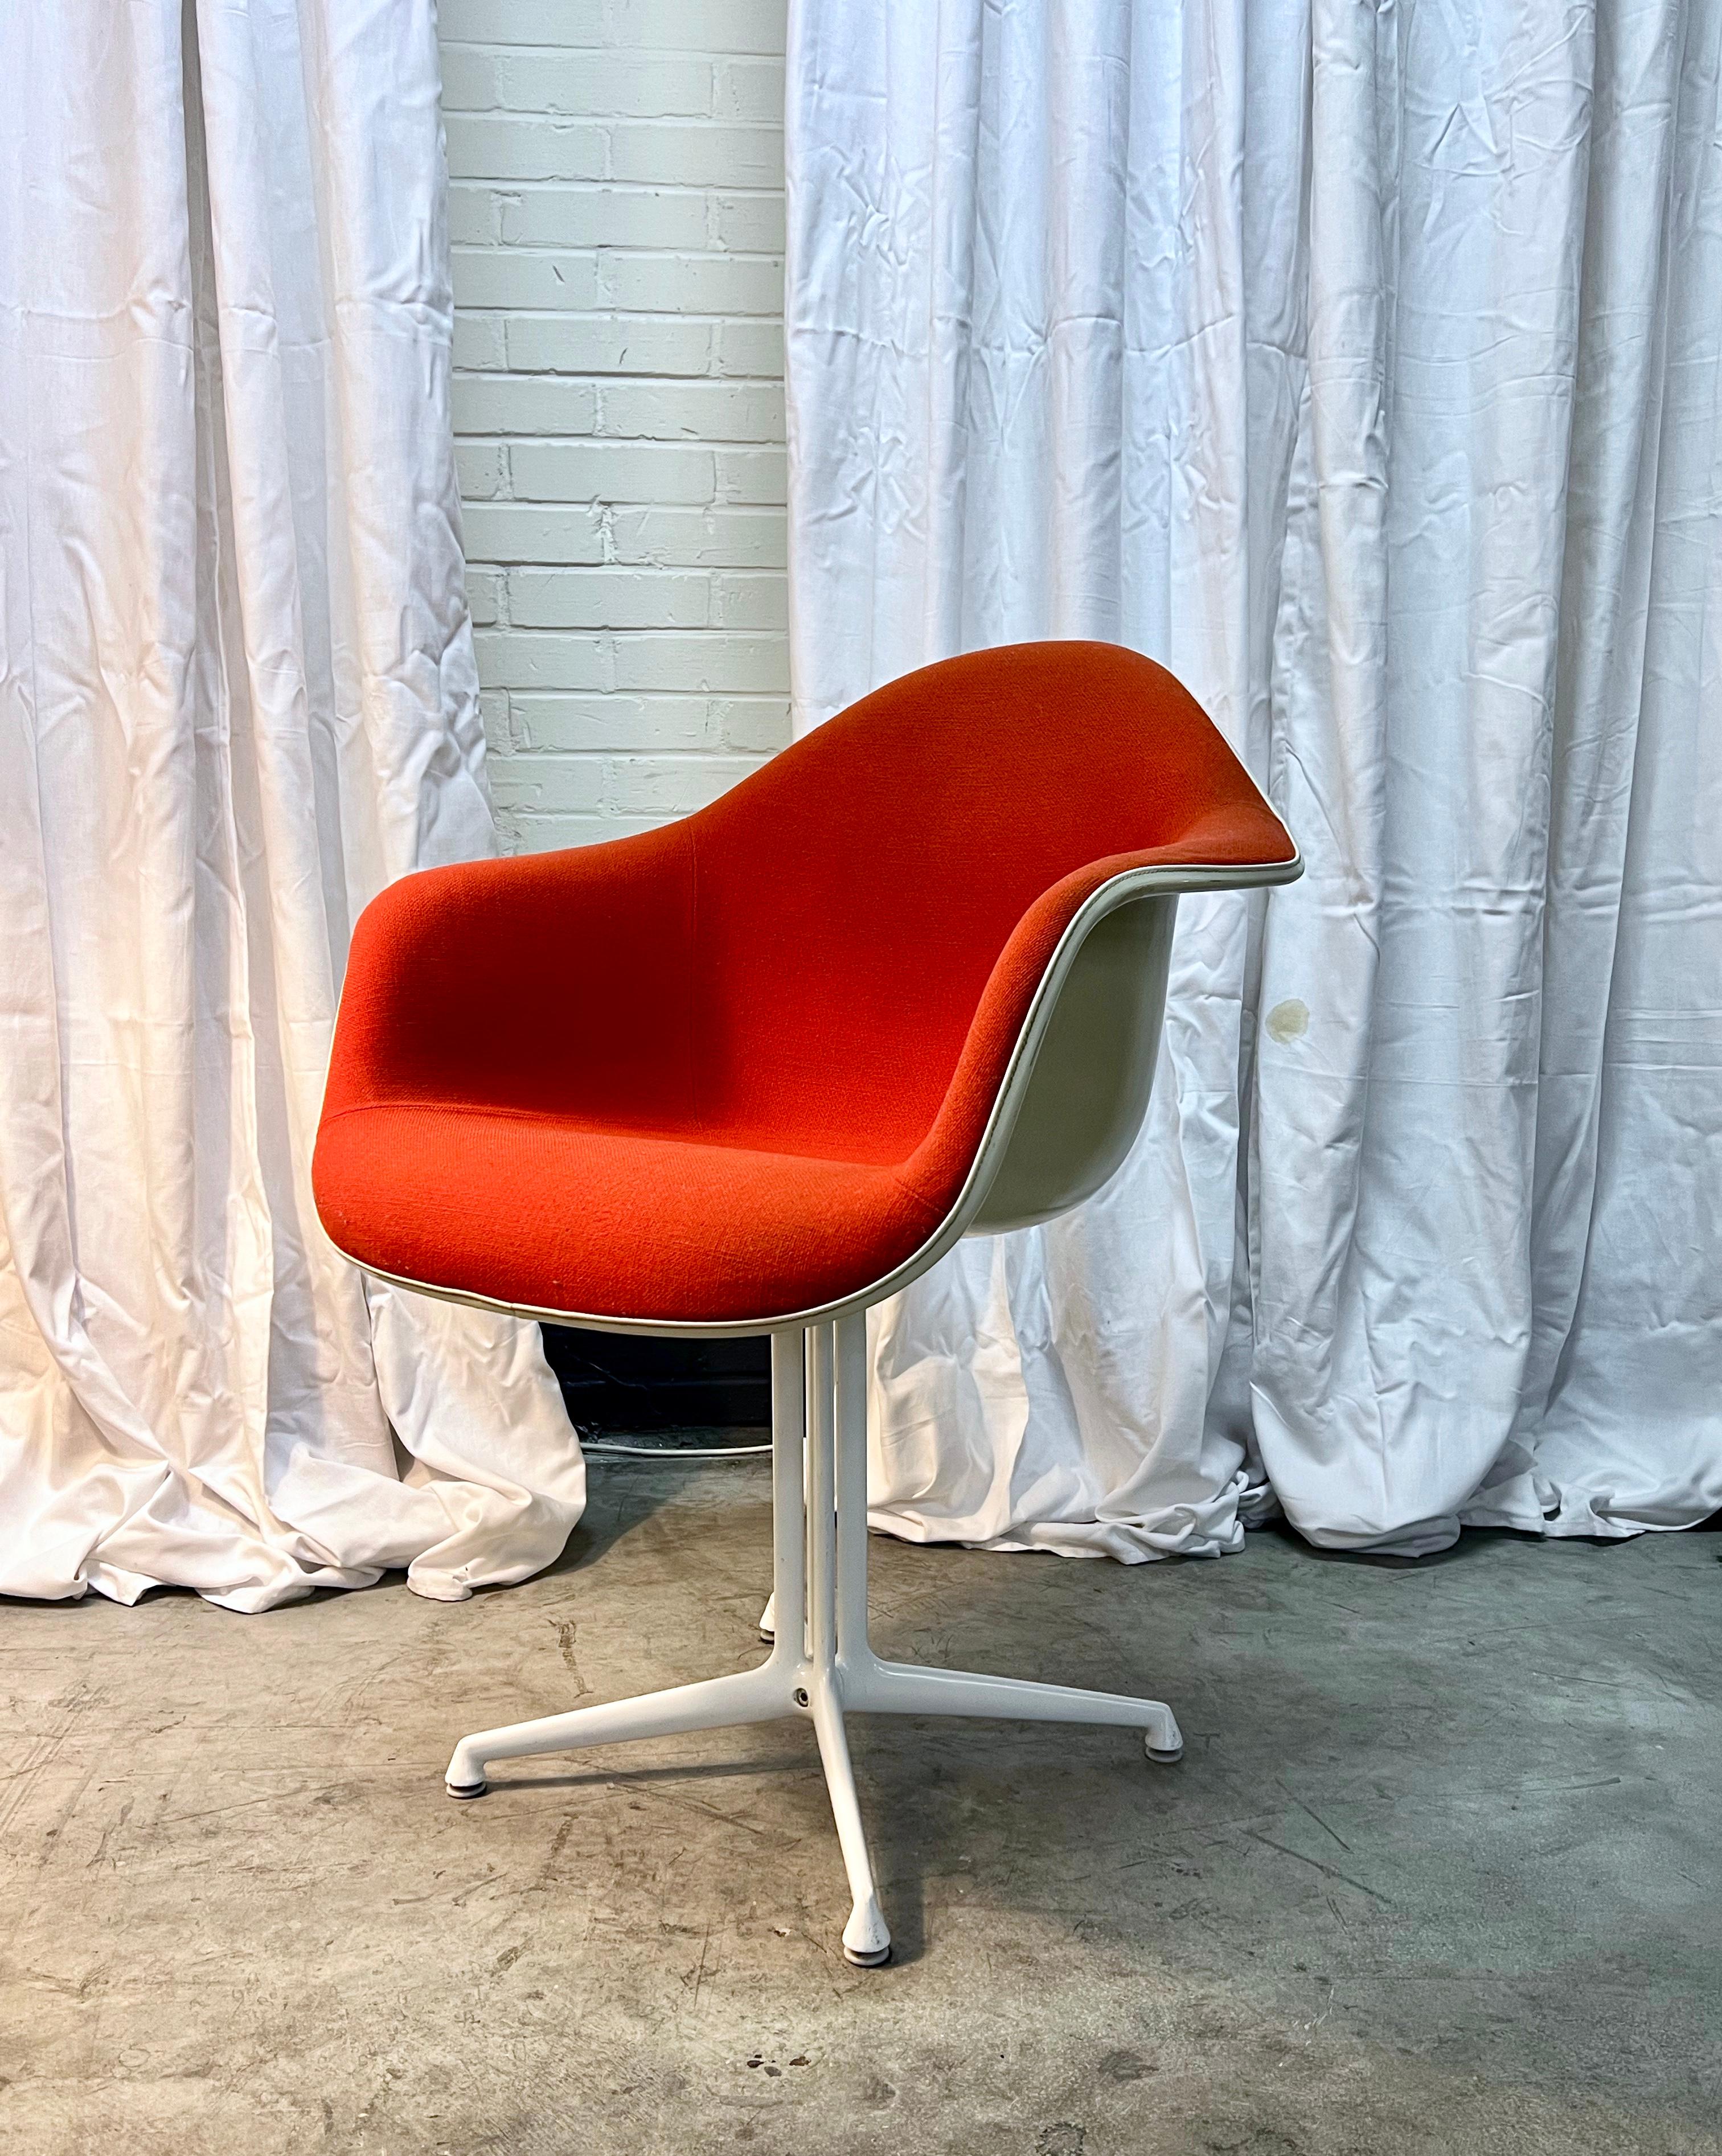 DAL chair by Charles and Ray Eames with an original La Fonda base!

This base was designed for the restaurant La Fonda del Sol in New York in the sixties (see photo). The shell is made of fiberglass.

The Eames Office designed a new base for the